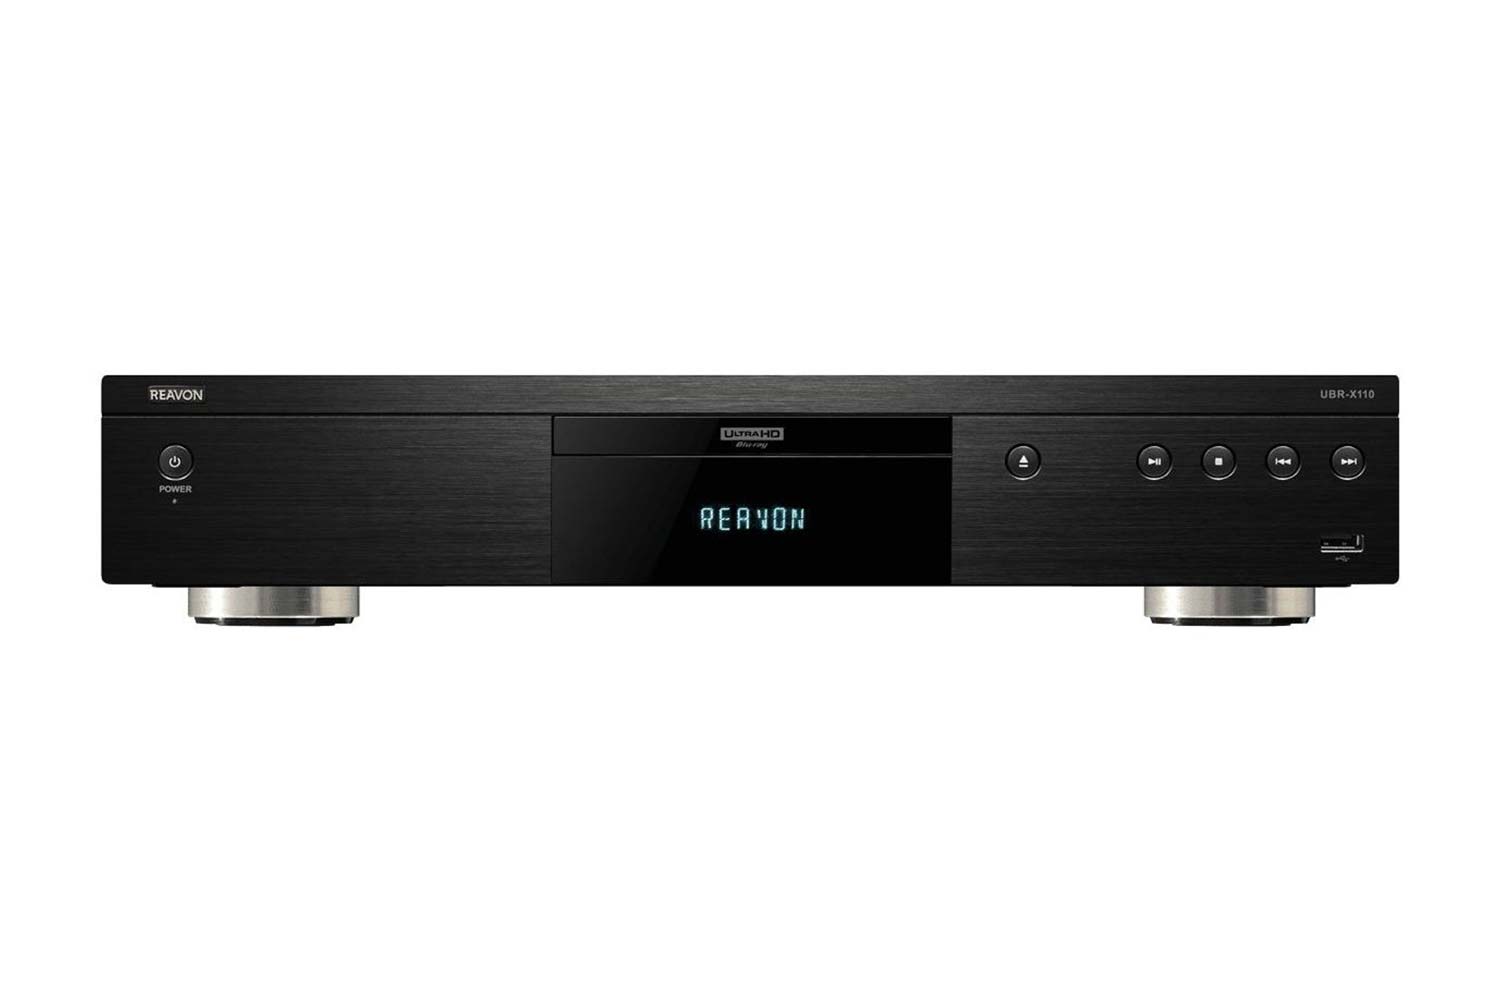 /upload/images/product/produkt_galerie/Reavon_UBR_X110_Bluray_Player_front.jpg